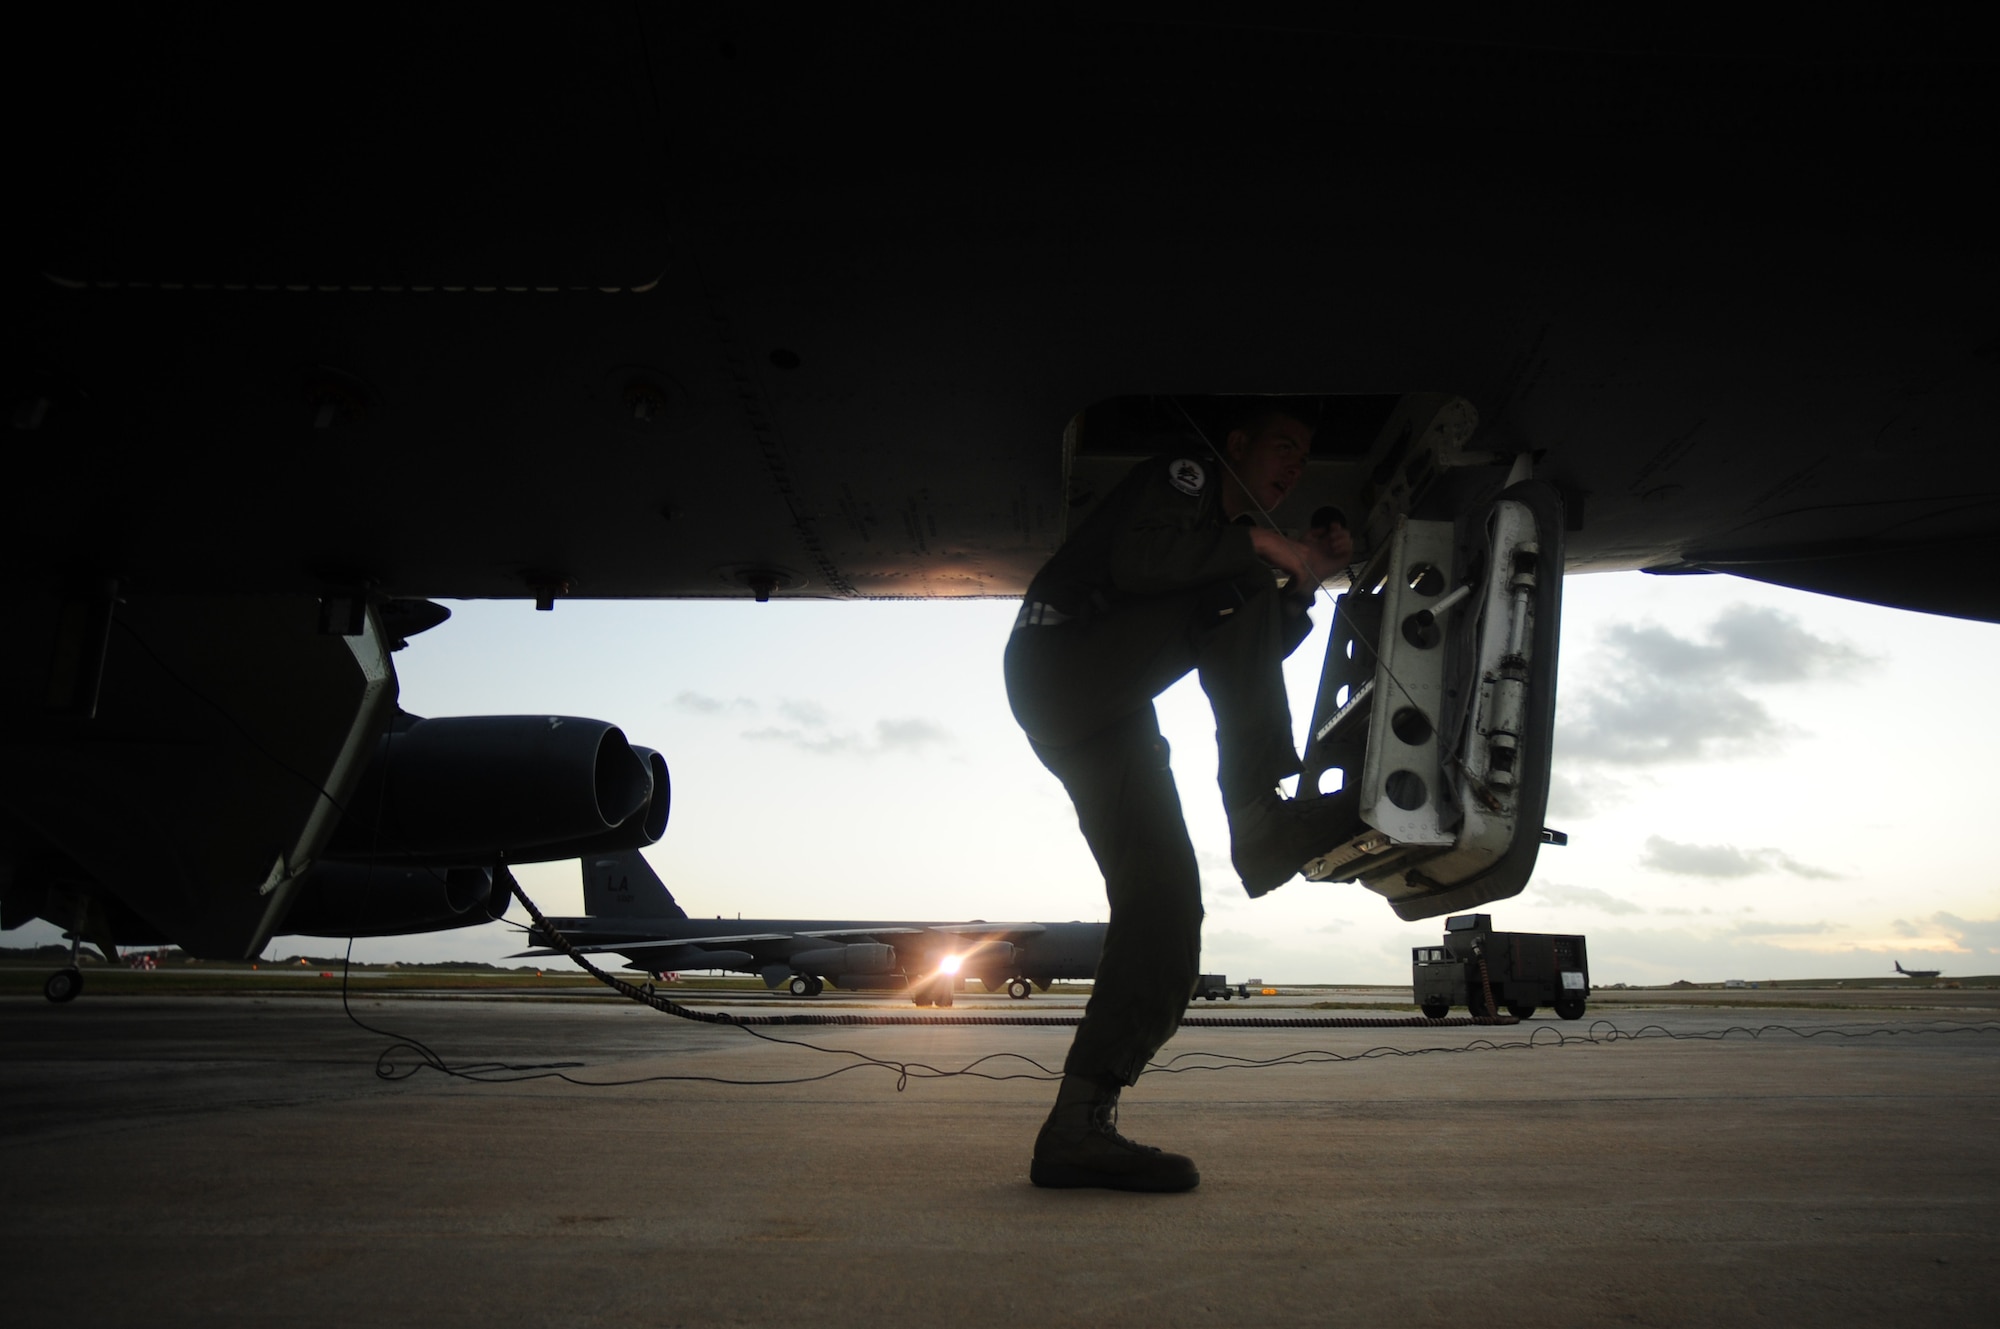 U.S. Air Force 1st Lt. Jim Lewis, a B-52 Stratofortress navigator assigned to the 20th Expeditionary Bomb Squadron, Barksdale Air Force Base, La., climbs aboard a B-52 aircraft prior to a mission in support of Exercise Cope North at Andersen AFB, Guam, Feb. 9, 2010. The United States Air Force and the Japanese Air Self-Defense Force conduct Cope North annually to increase combat readiness and interoperability, concentrating on coordination and evaluation of air tactics, techniques and procedures.  The ability for both nations to work together increases their preparedness to support real-world contingencies.  (U.S. Air Force photo by Staff Sgt. Jacob N. Bailey)



